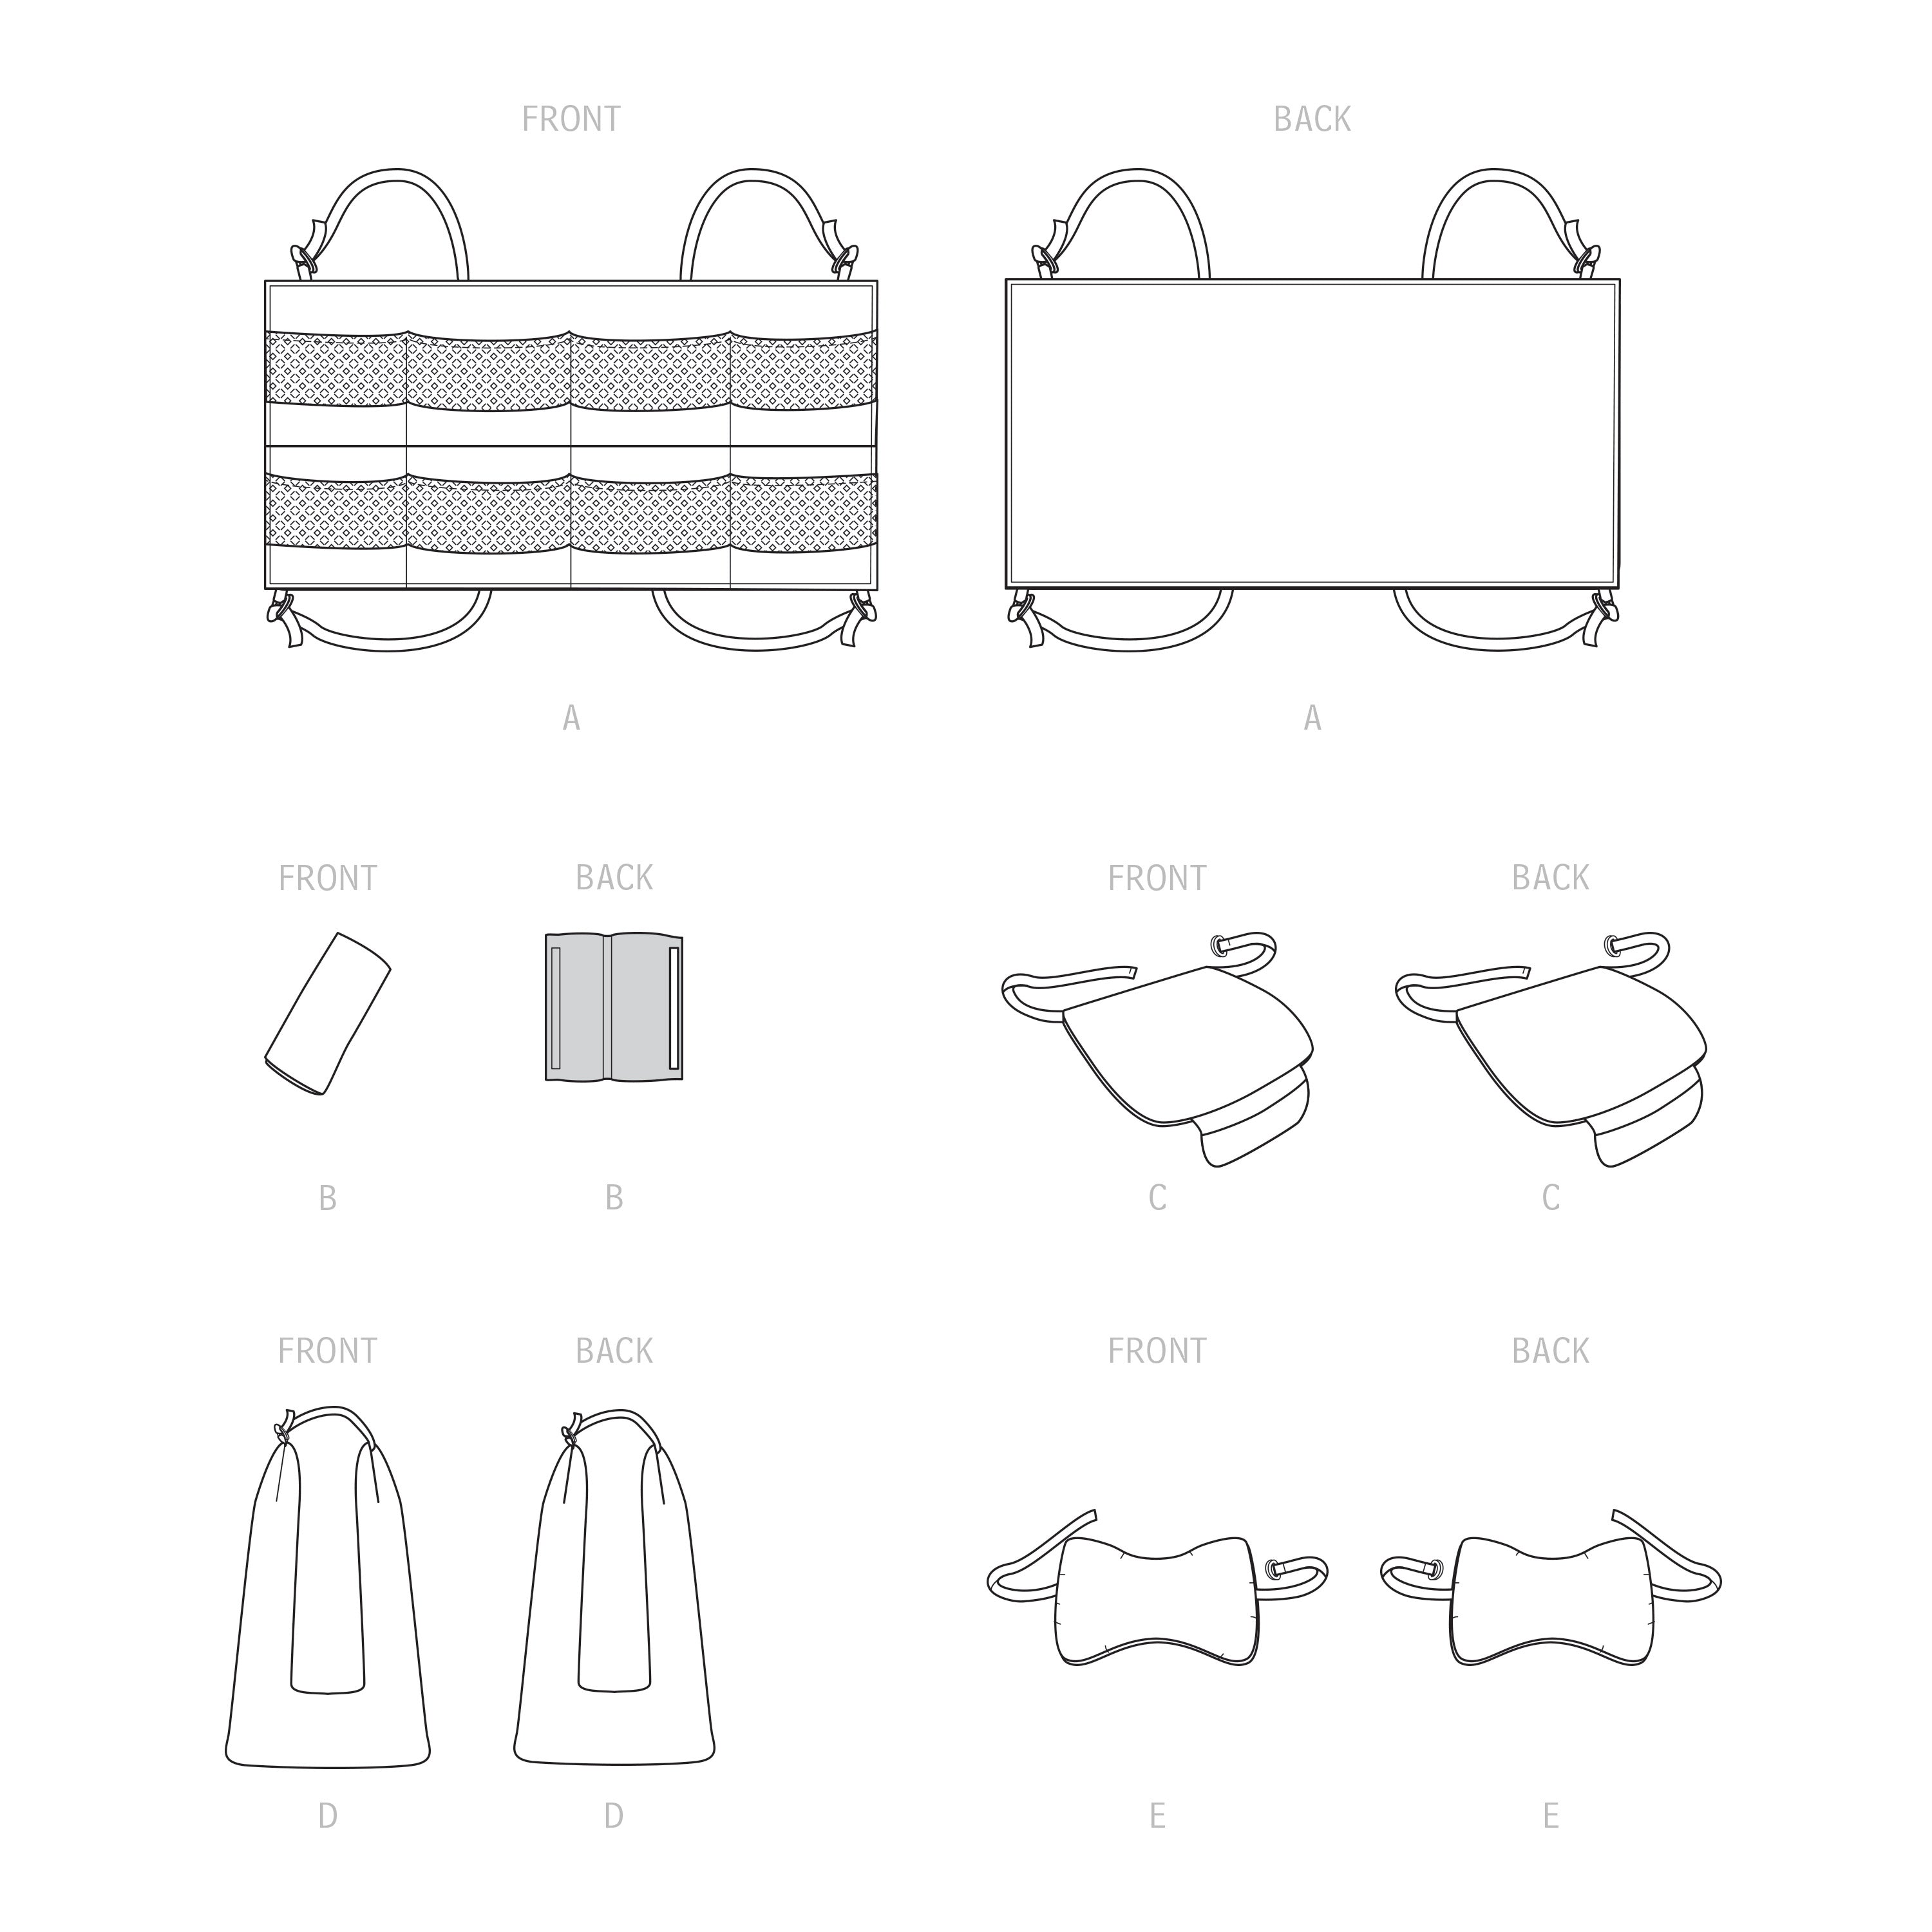 Simplicity Sewing Pattern 9501 Car Organizer and accessories from Jaycotts Sewing Supplies